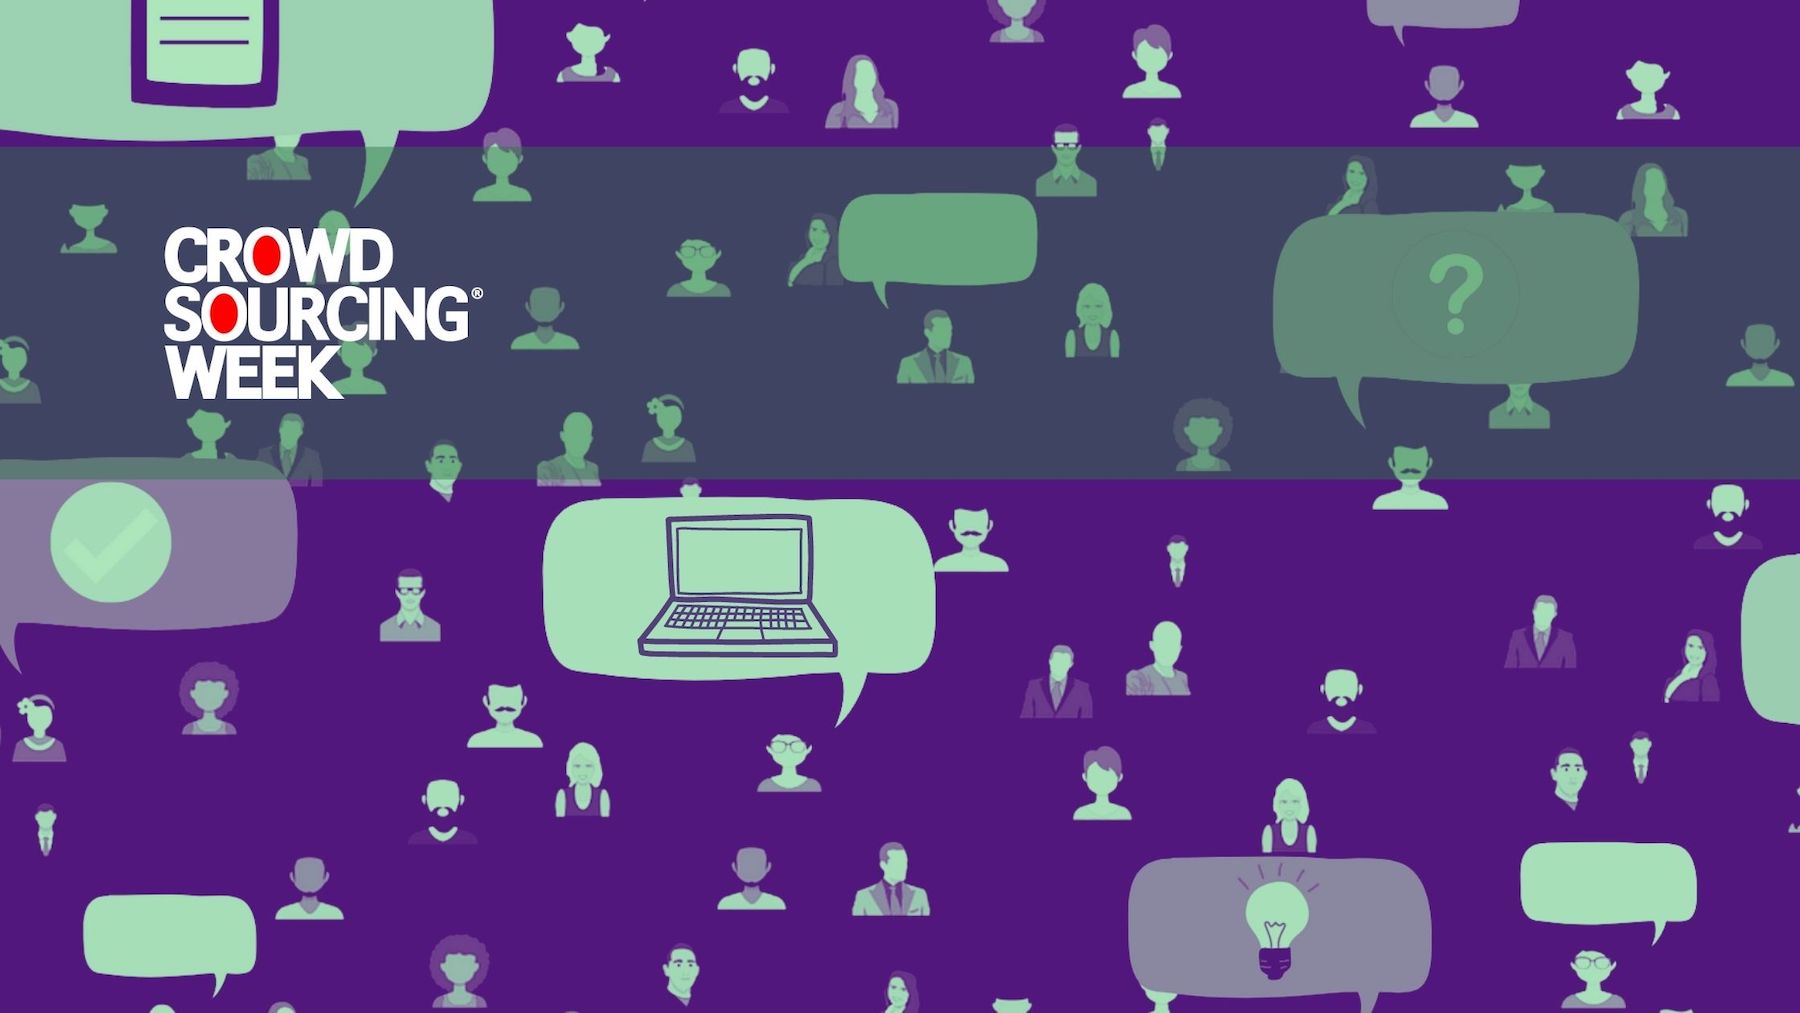 Achieving Standout in Crowdtesting By Being Outstanding - Crowdsourcing Week